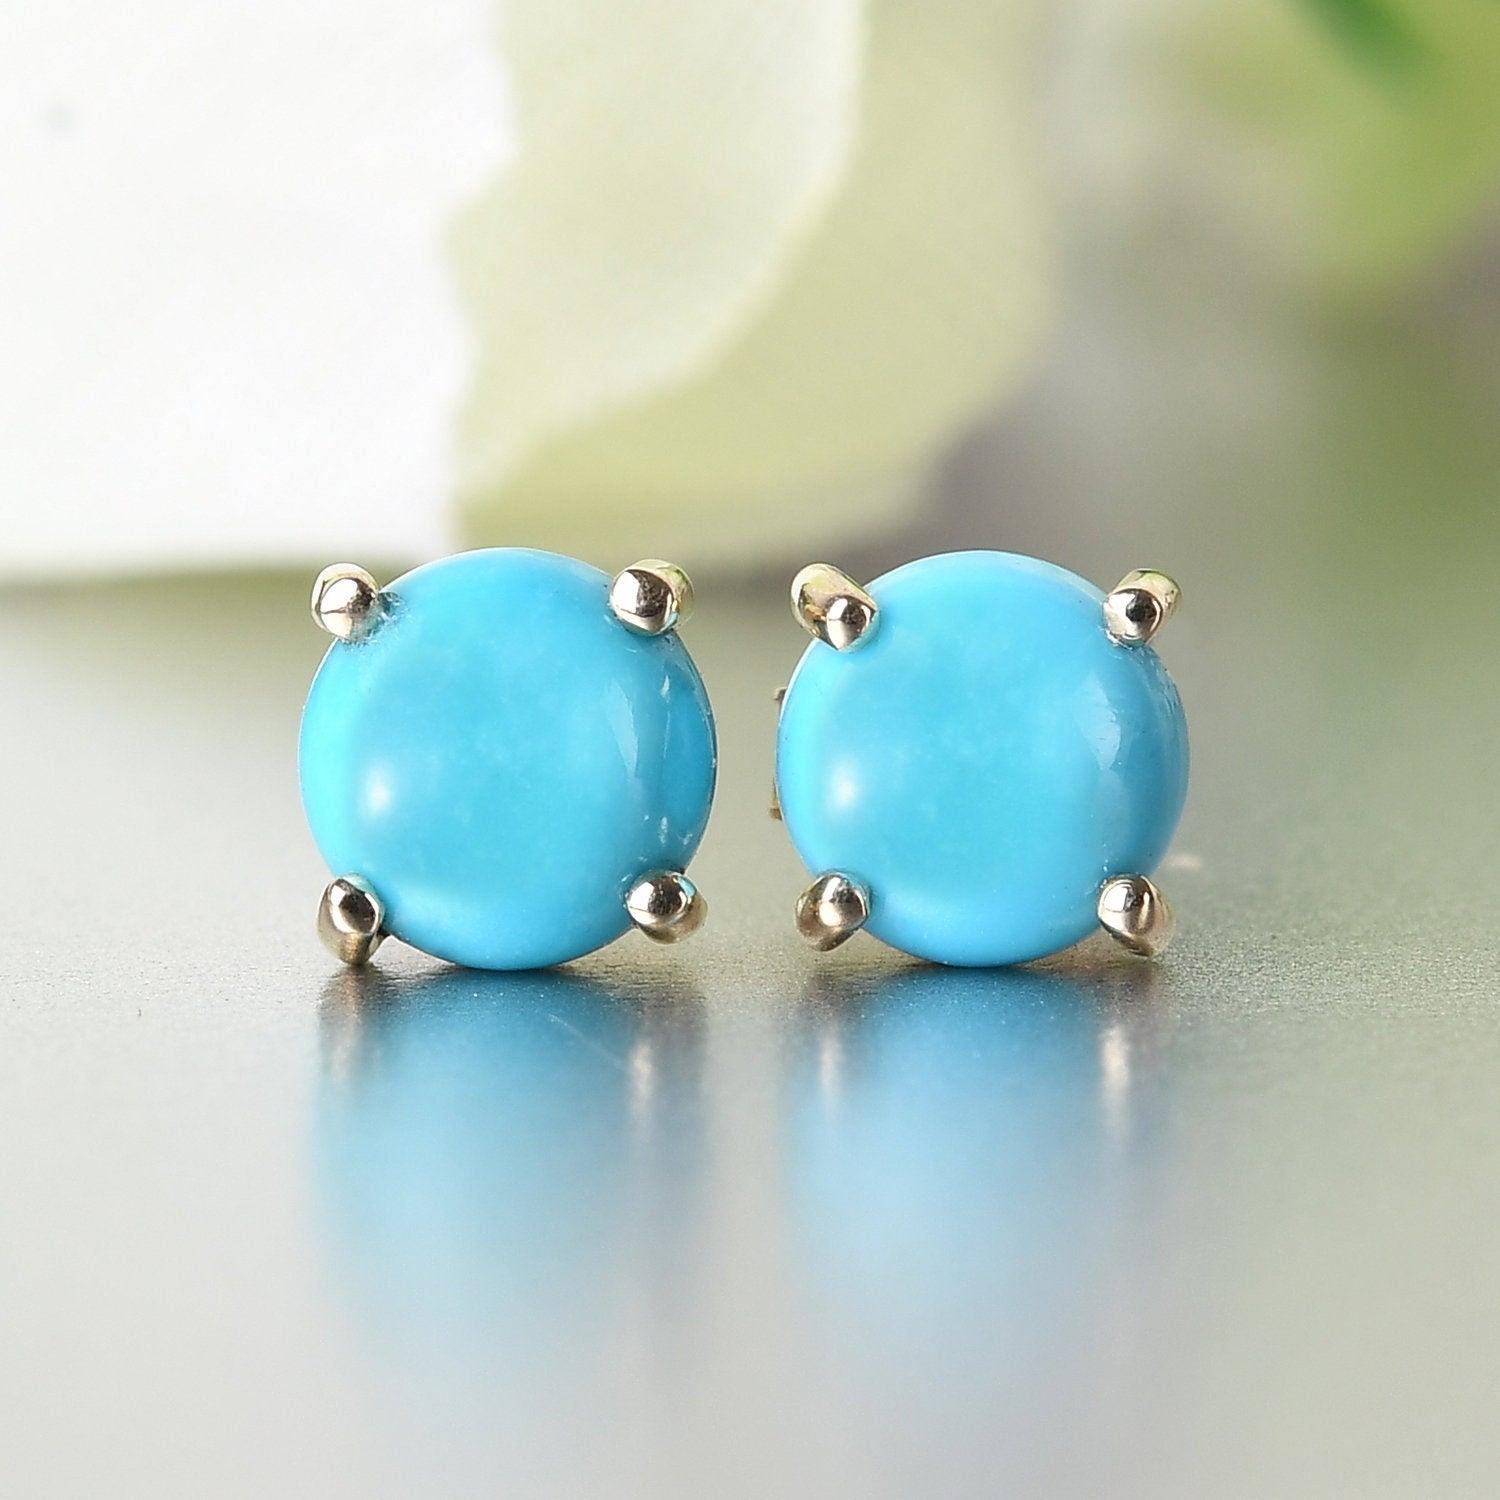 Dainty 5mm Tiny Turquoise Post Earrings | Super Small Sterling Silver Turquoise Stud Earrings | Sterling Silver Studs | Tiny Turquoise Studs - Silverhubjewels